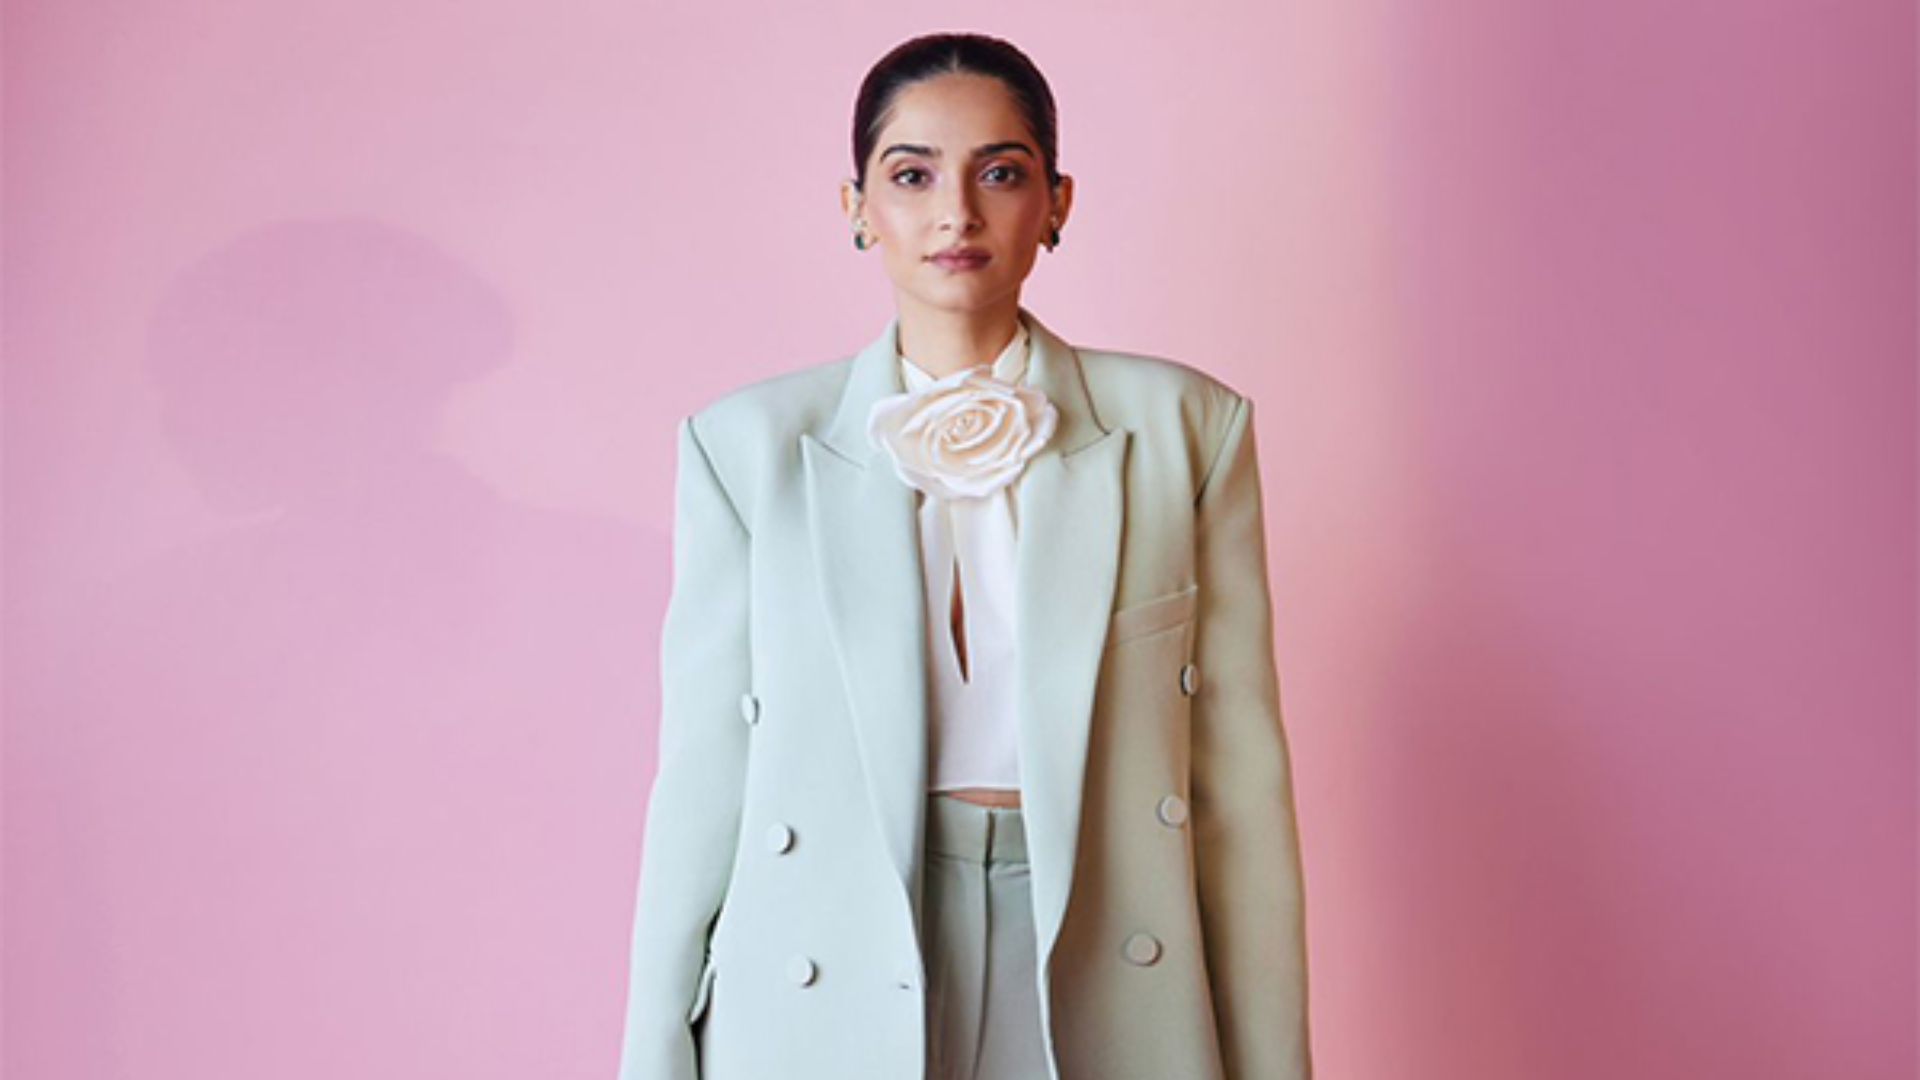 UK’s Tate Modern museum inducts Sonam Kapoor in its South Asia Acquisition Committee